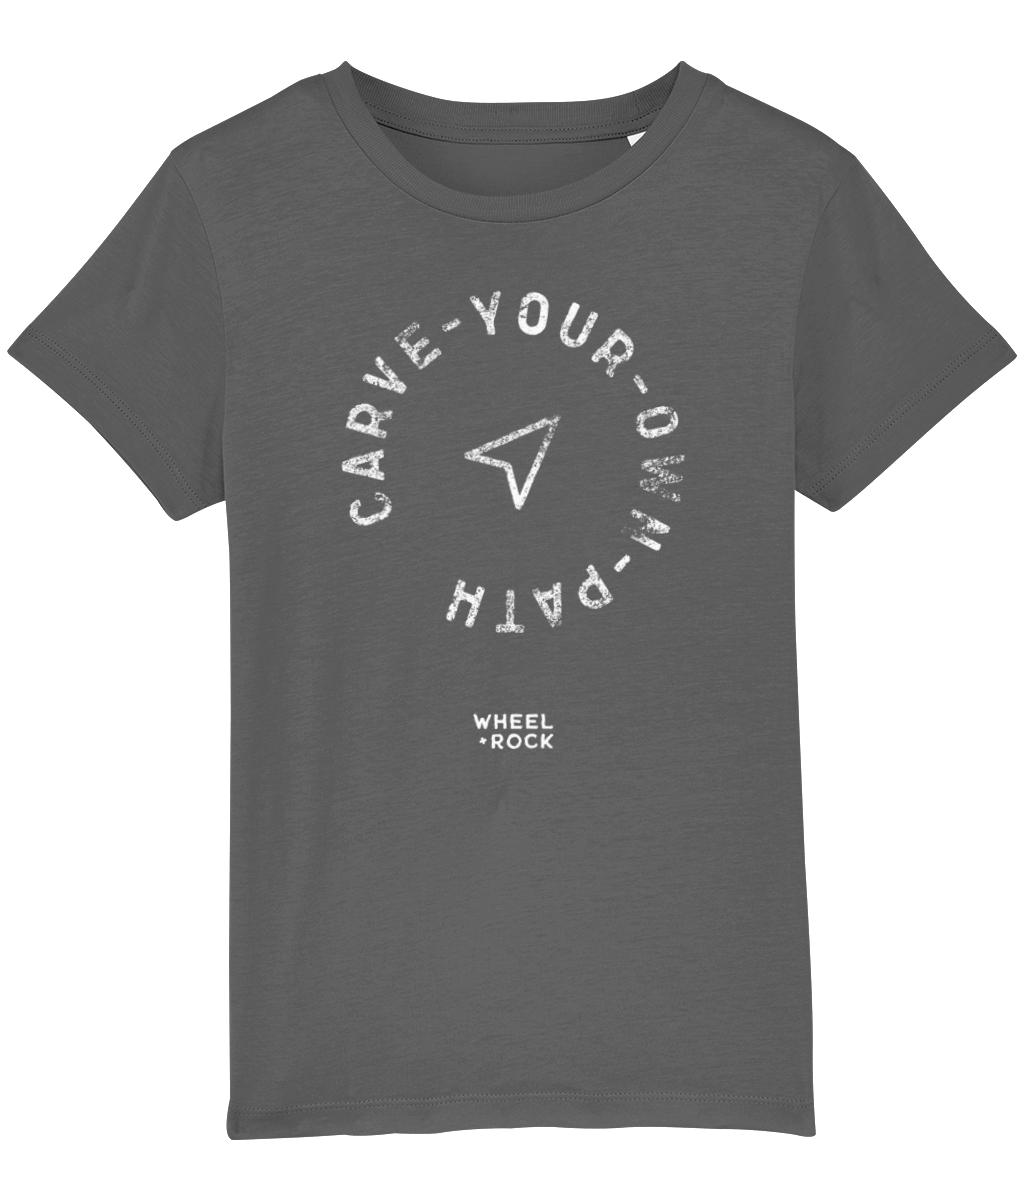 Carve Your Own Path - Kids Tee - DARKS